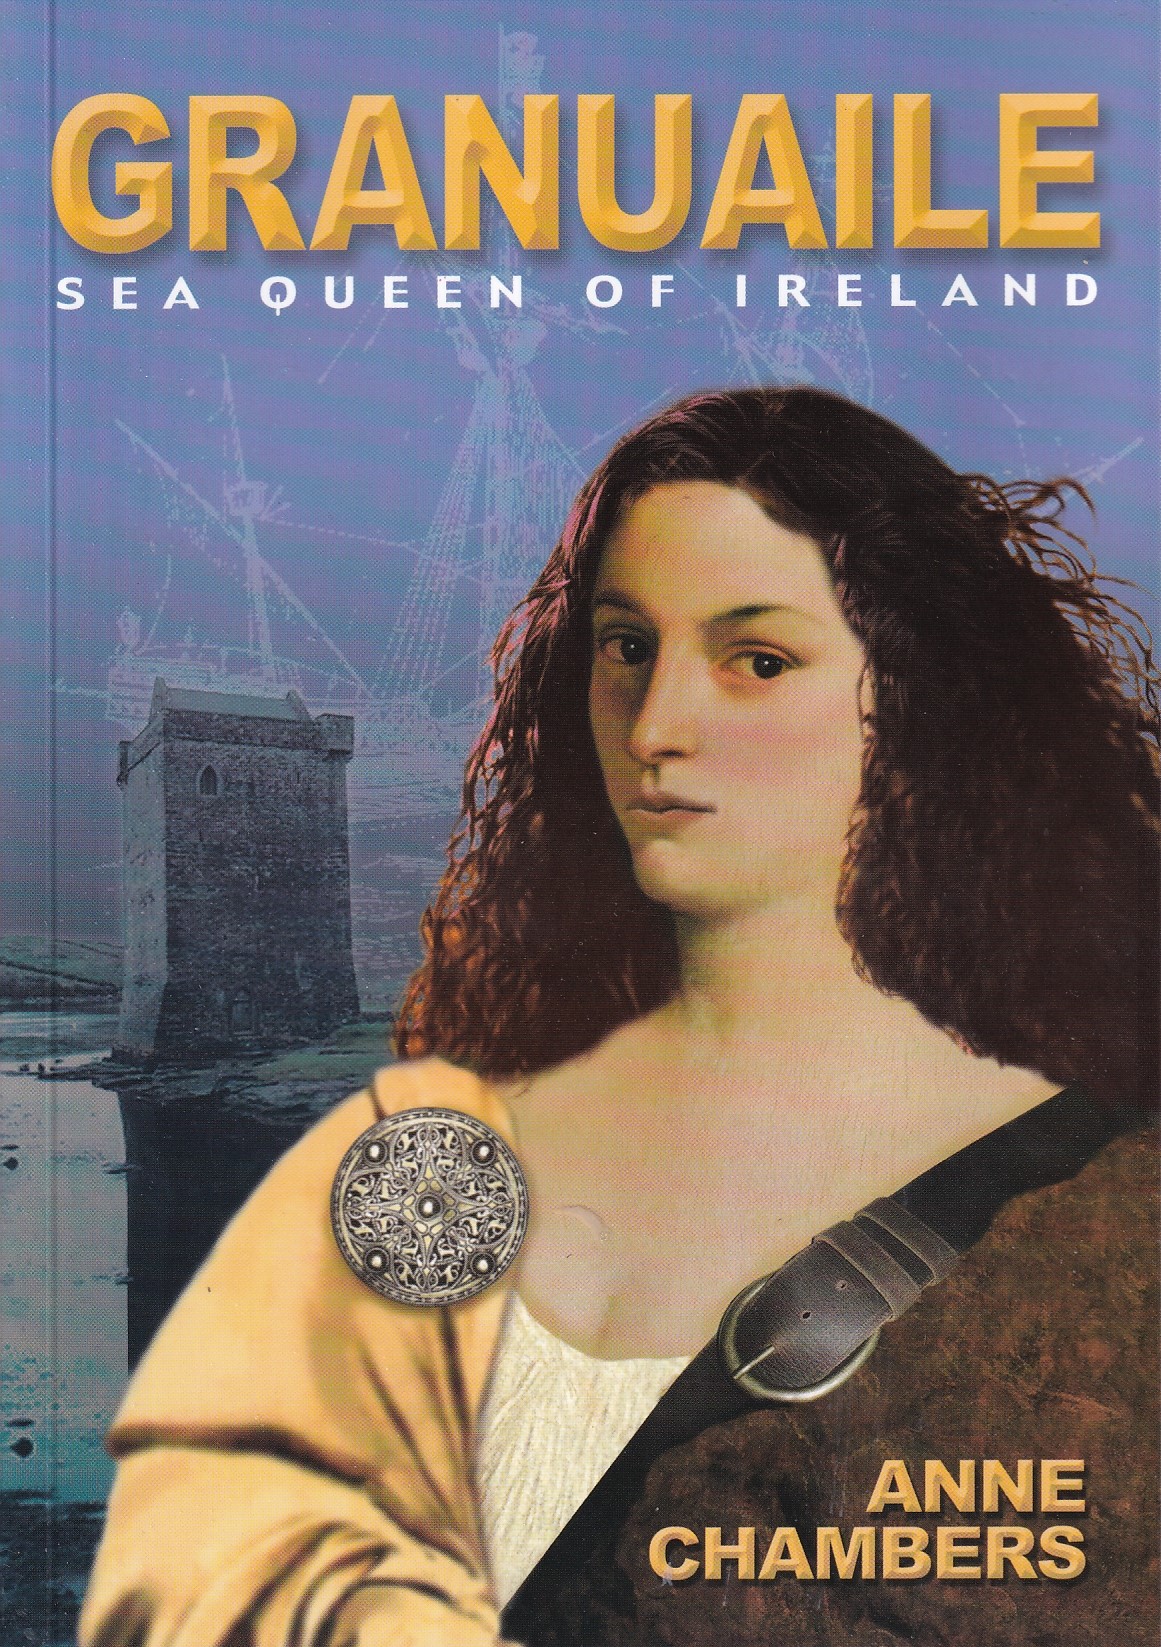 Granuaile: Sea-queen of Ireland by Anne Chambers